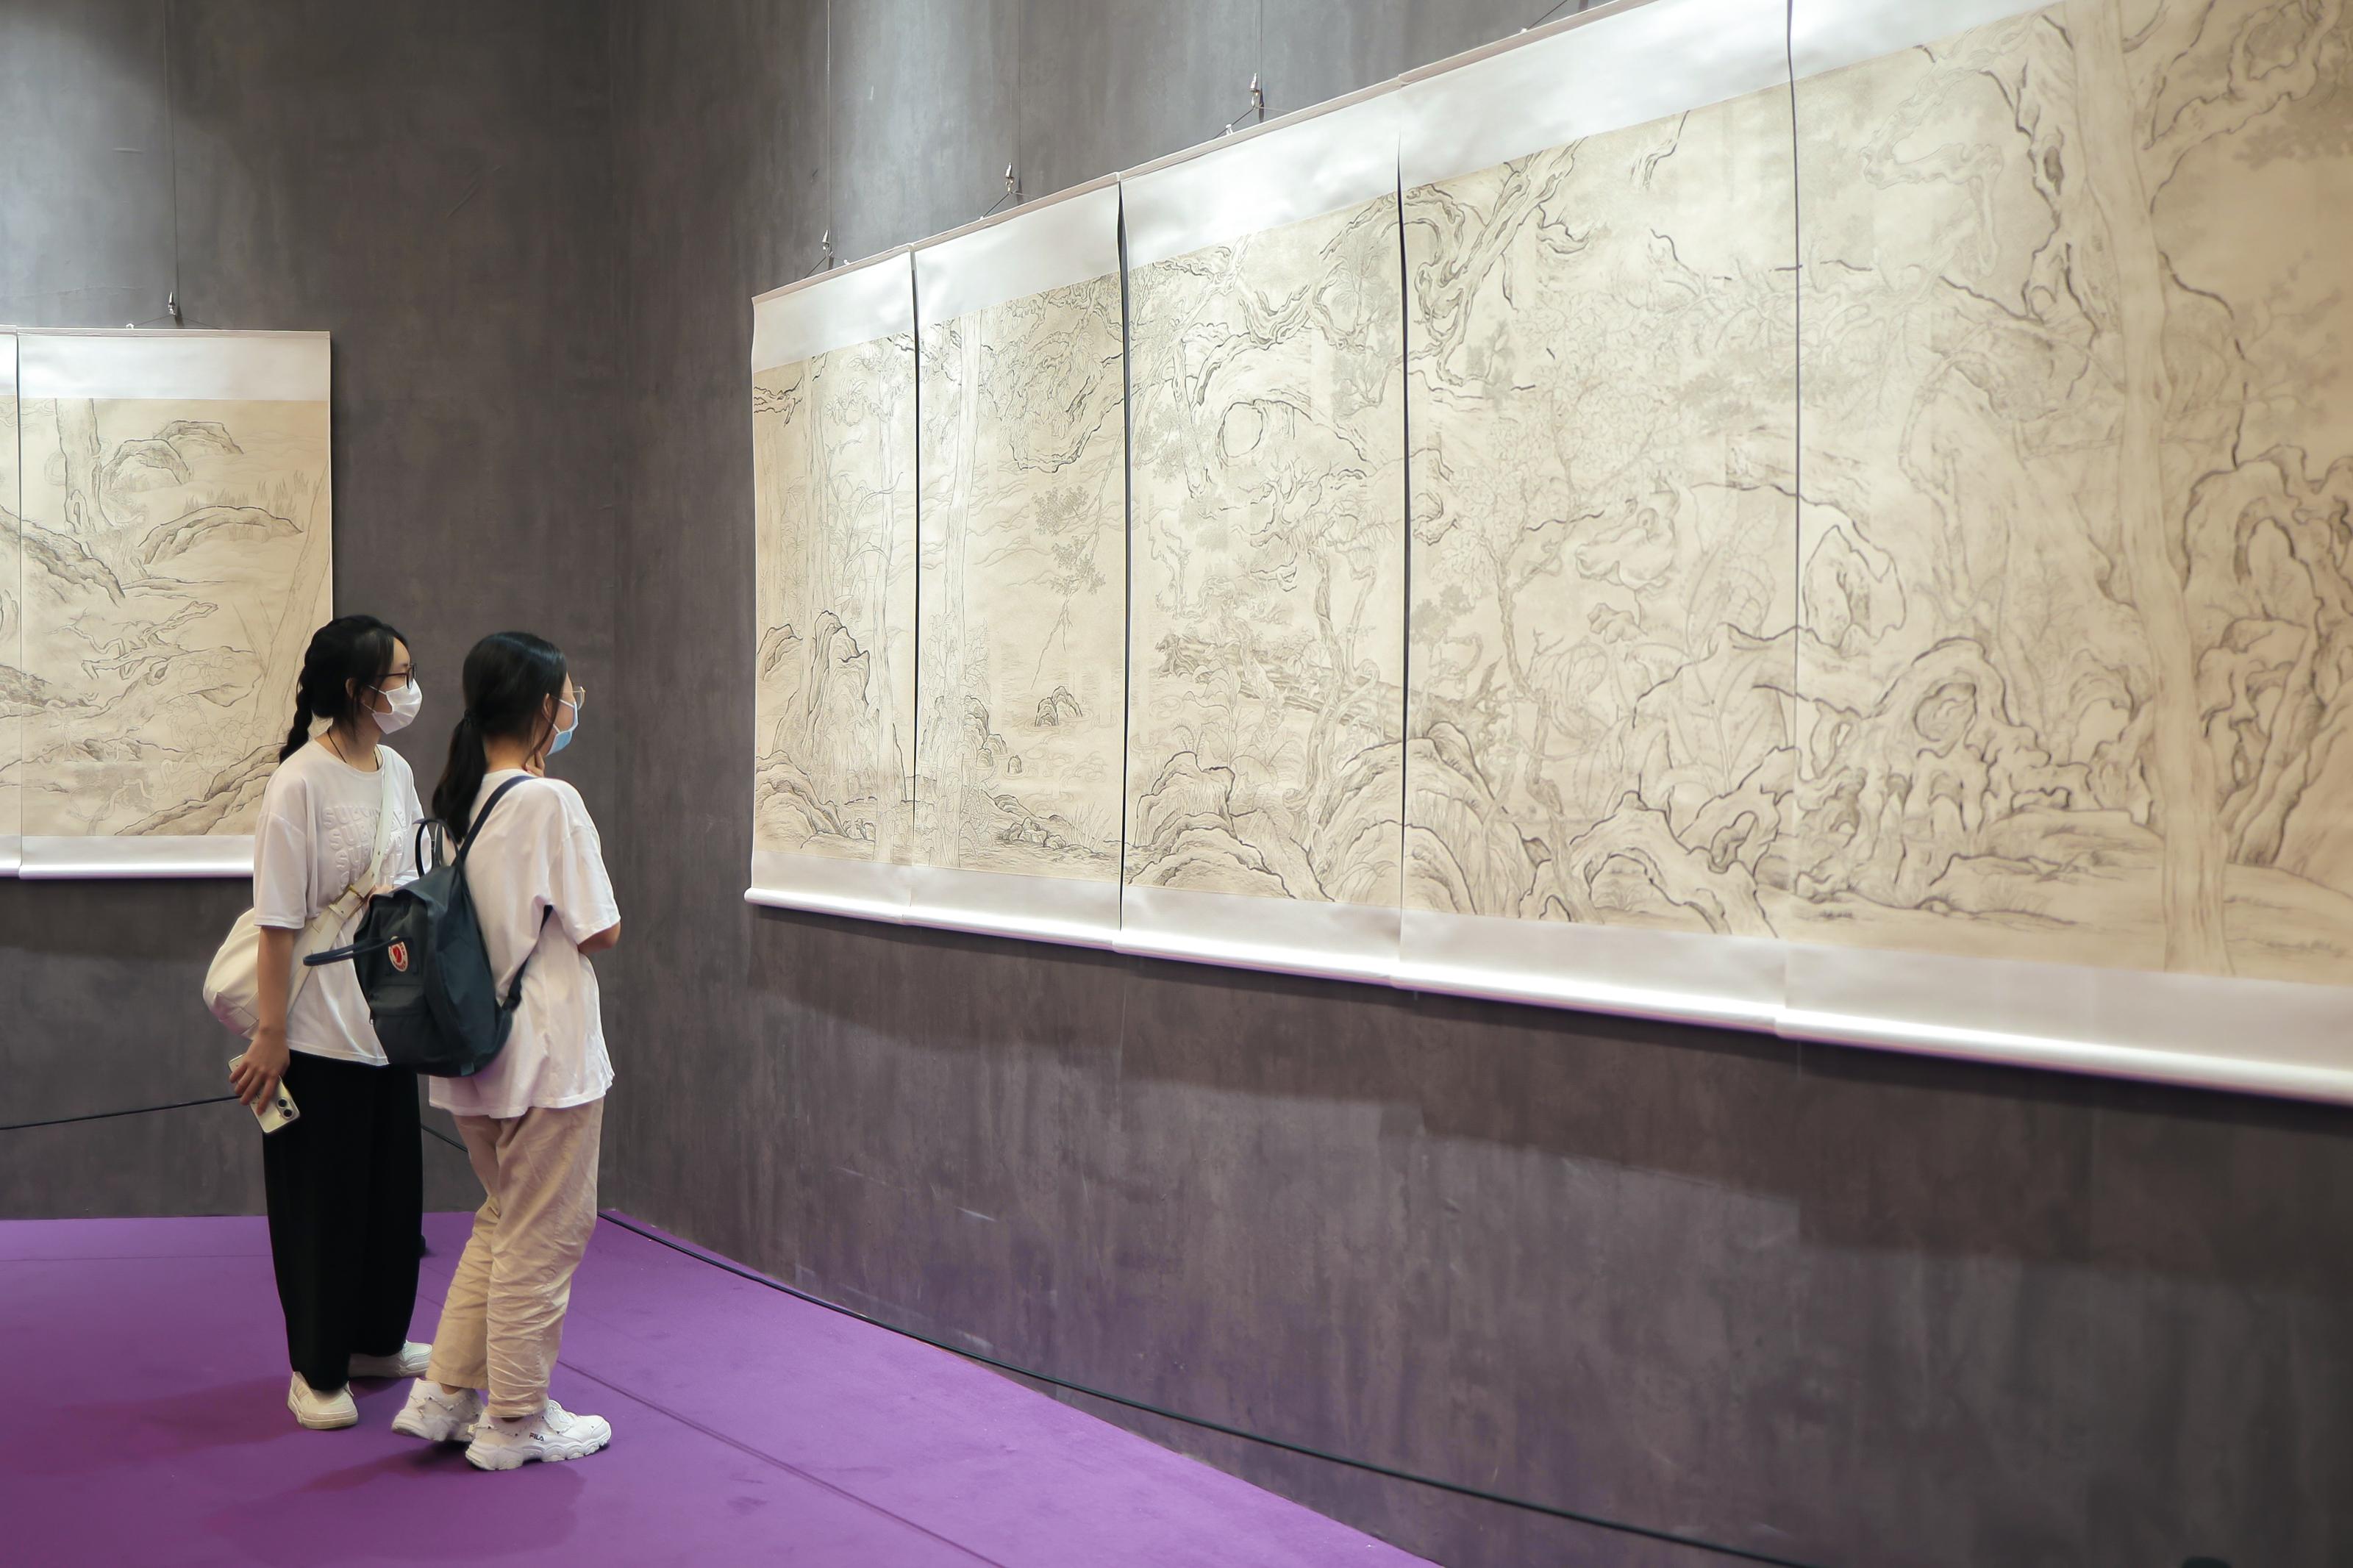 Co-organised by the Art Promotion Office and the Hong Kong Designers Association, the fifth exhibition of the second round of the "Art >< Creativity" exhibition series in the Greater Bay Area, "The Concrete Jungle", is open from today (September 26) to November 12 at the Zhaoqing Museum. Photo shows visitors viewing the artwork "Song of the Wanderers" by artist Chan Kwan Lok.